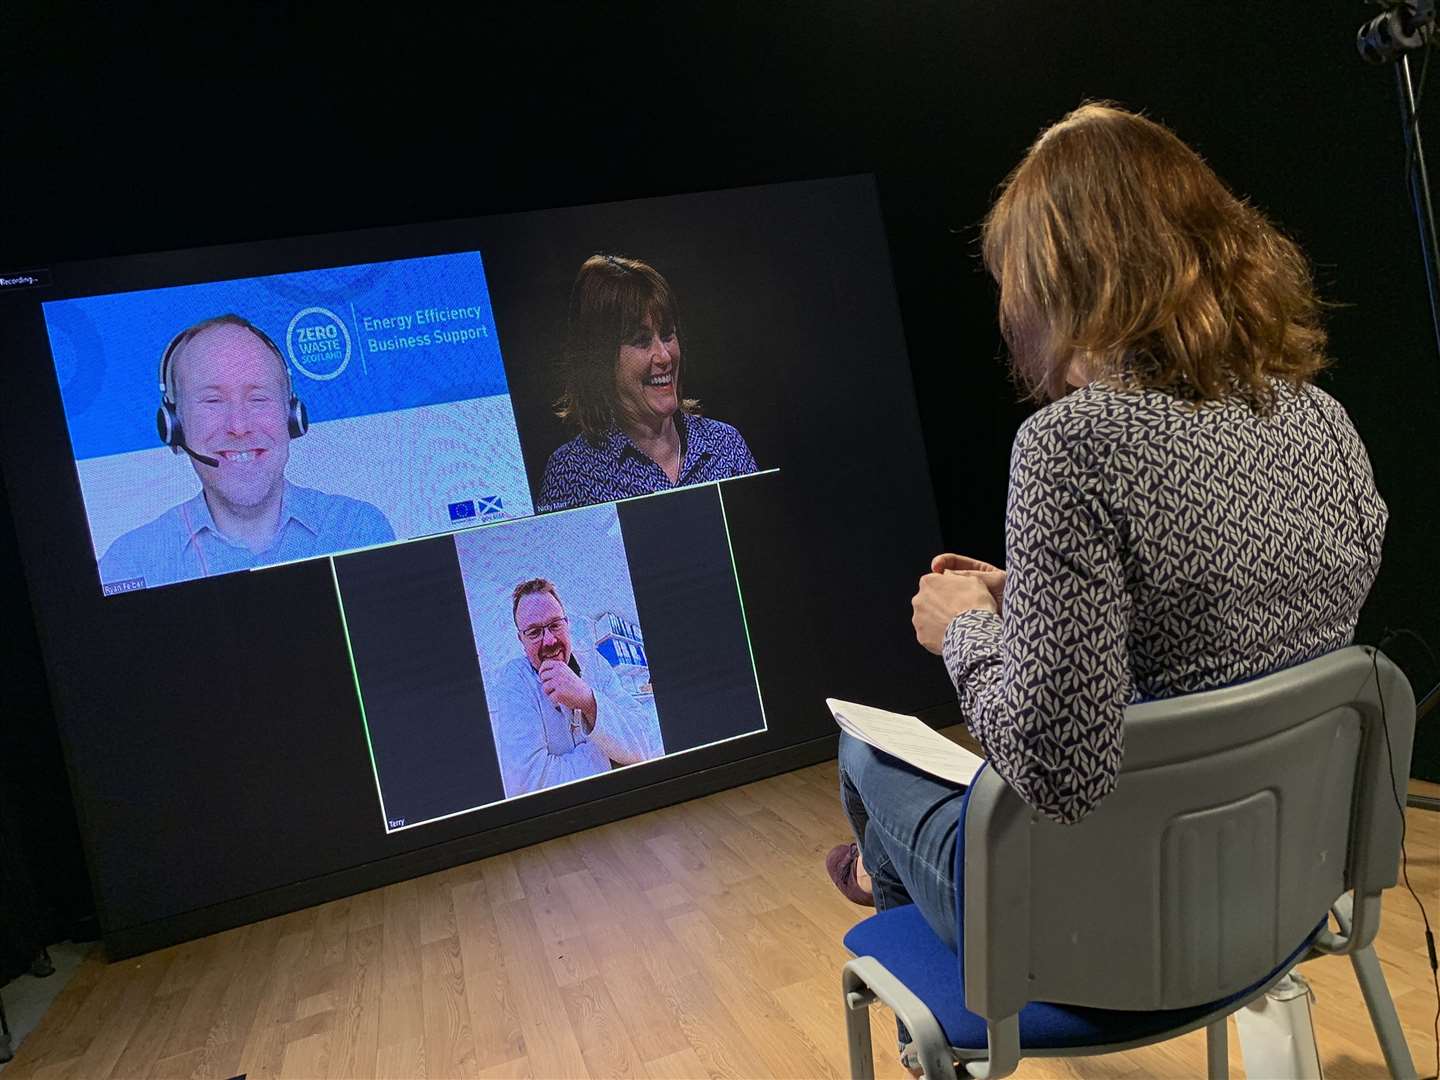 Nicky Marr in the studio interviews Terry Stebbings and Ryan Felber as part of virtual SHREC conference 2020.